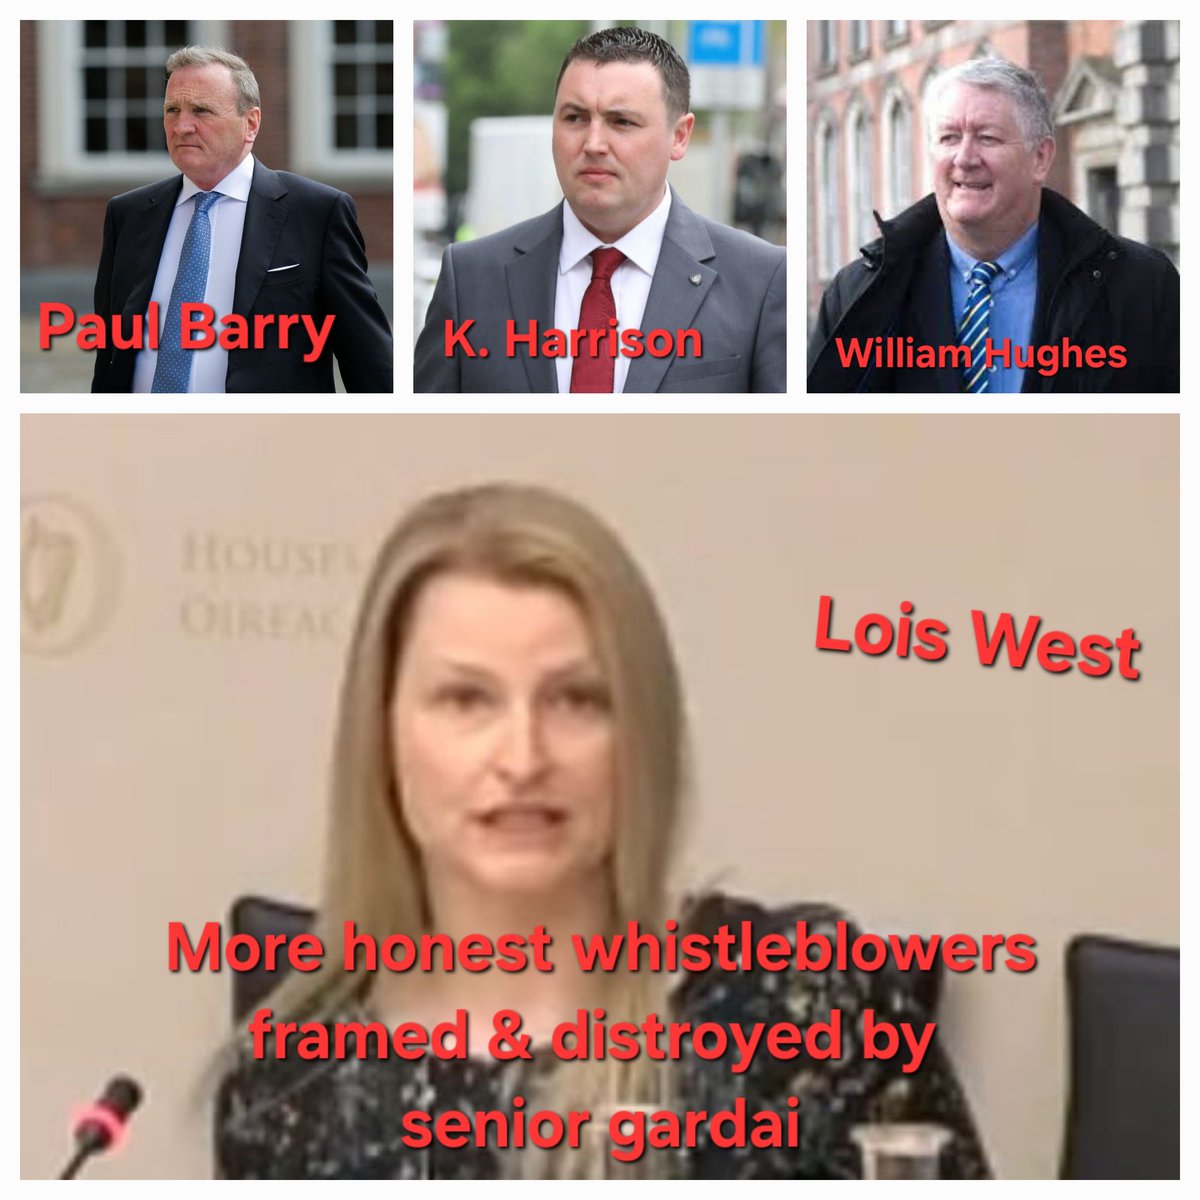 @paddycosgrave Pity AGSI doesnt show support for whistleblowers? 
#gardacorruption rampant still